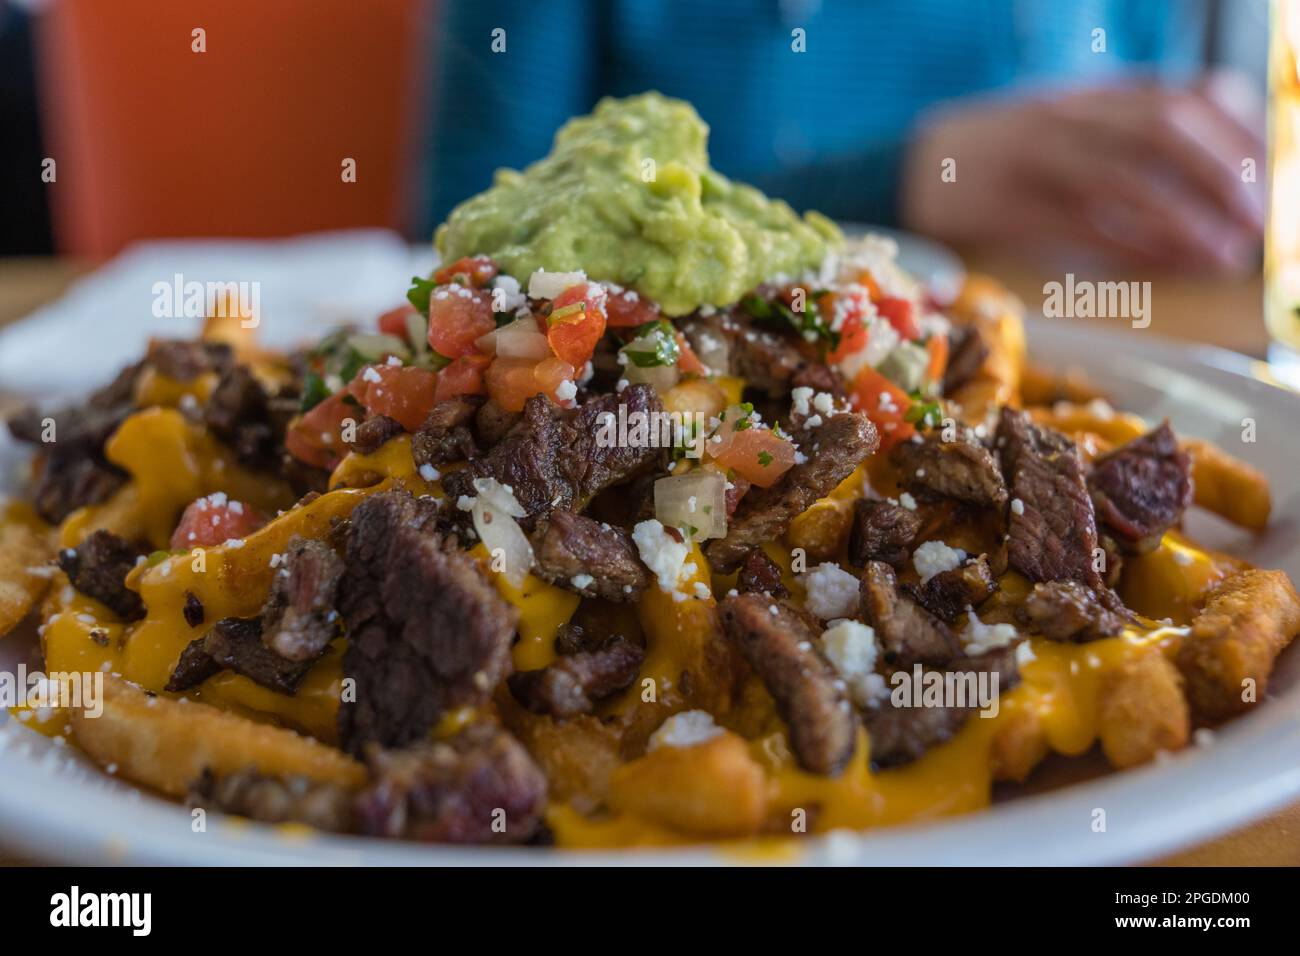 Close-up of a plate of carne asada fries with guacamole on top. This is a local speciality of parts of Arizona and the San Diego area of California. Stock Photo